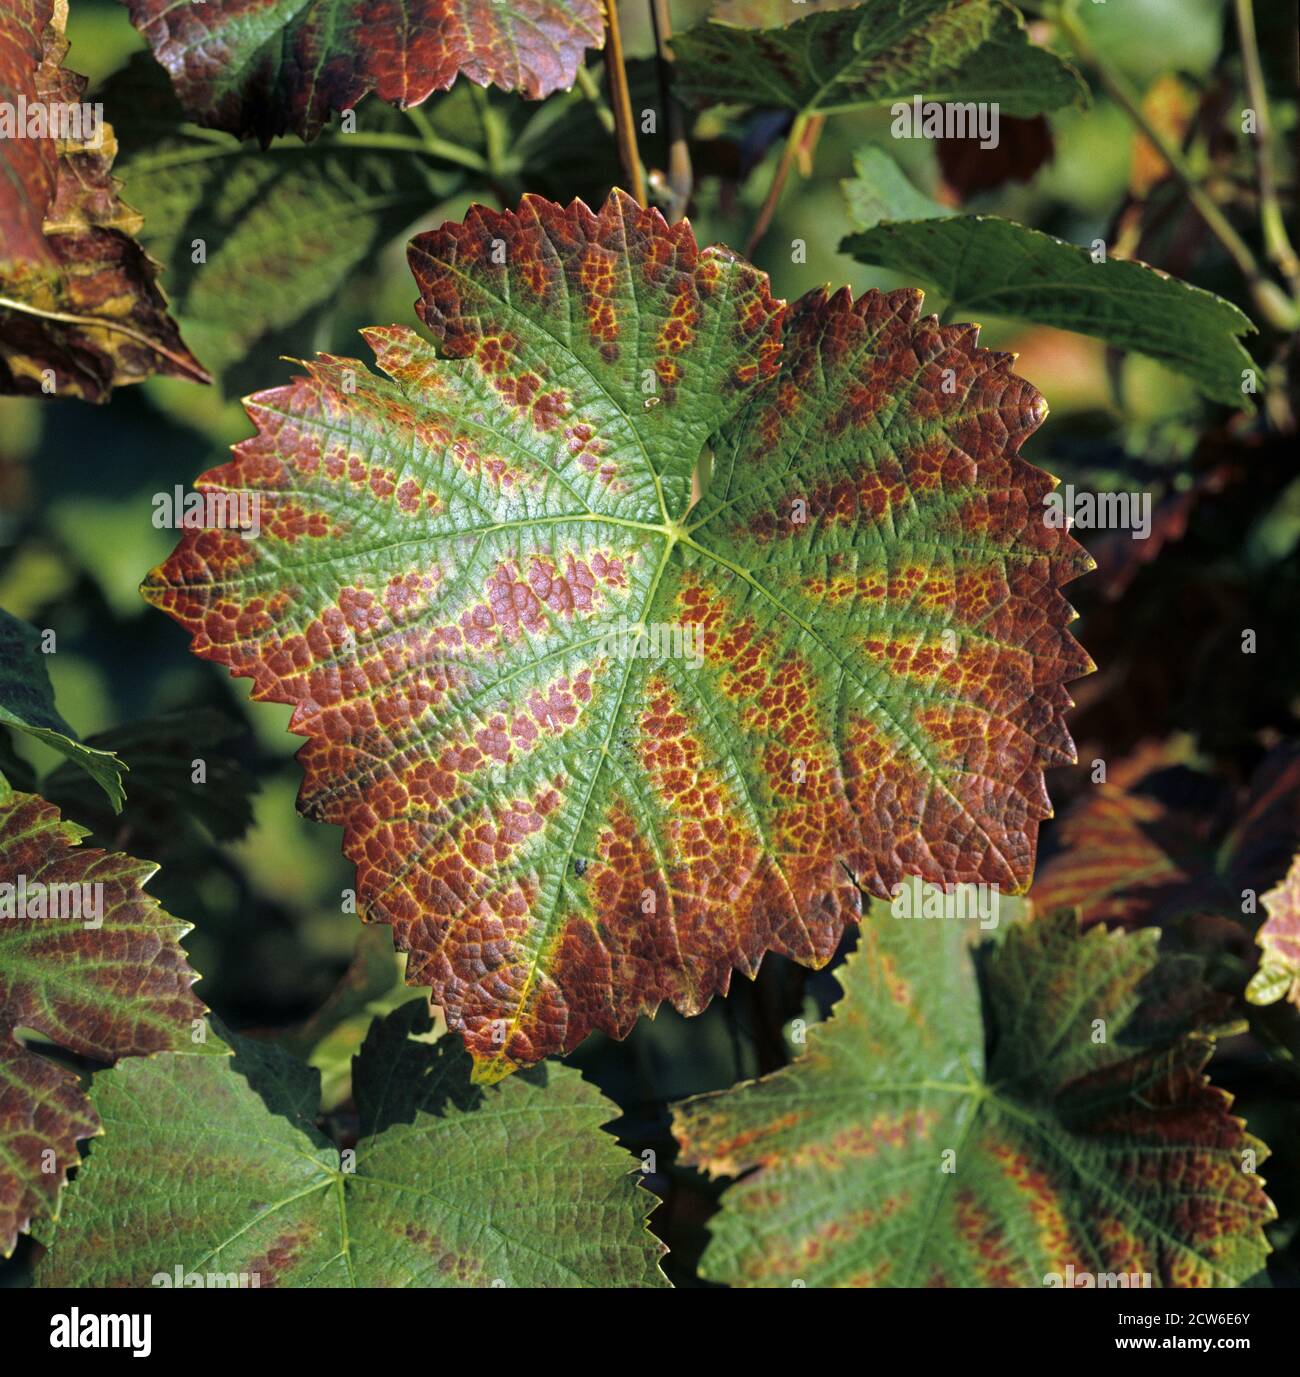 Magnesium deficiency symptoms, reddening of leaves on Pinot Noir wine grapes in fruit, Champagne Region, France Stock Photo